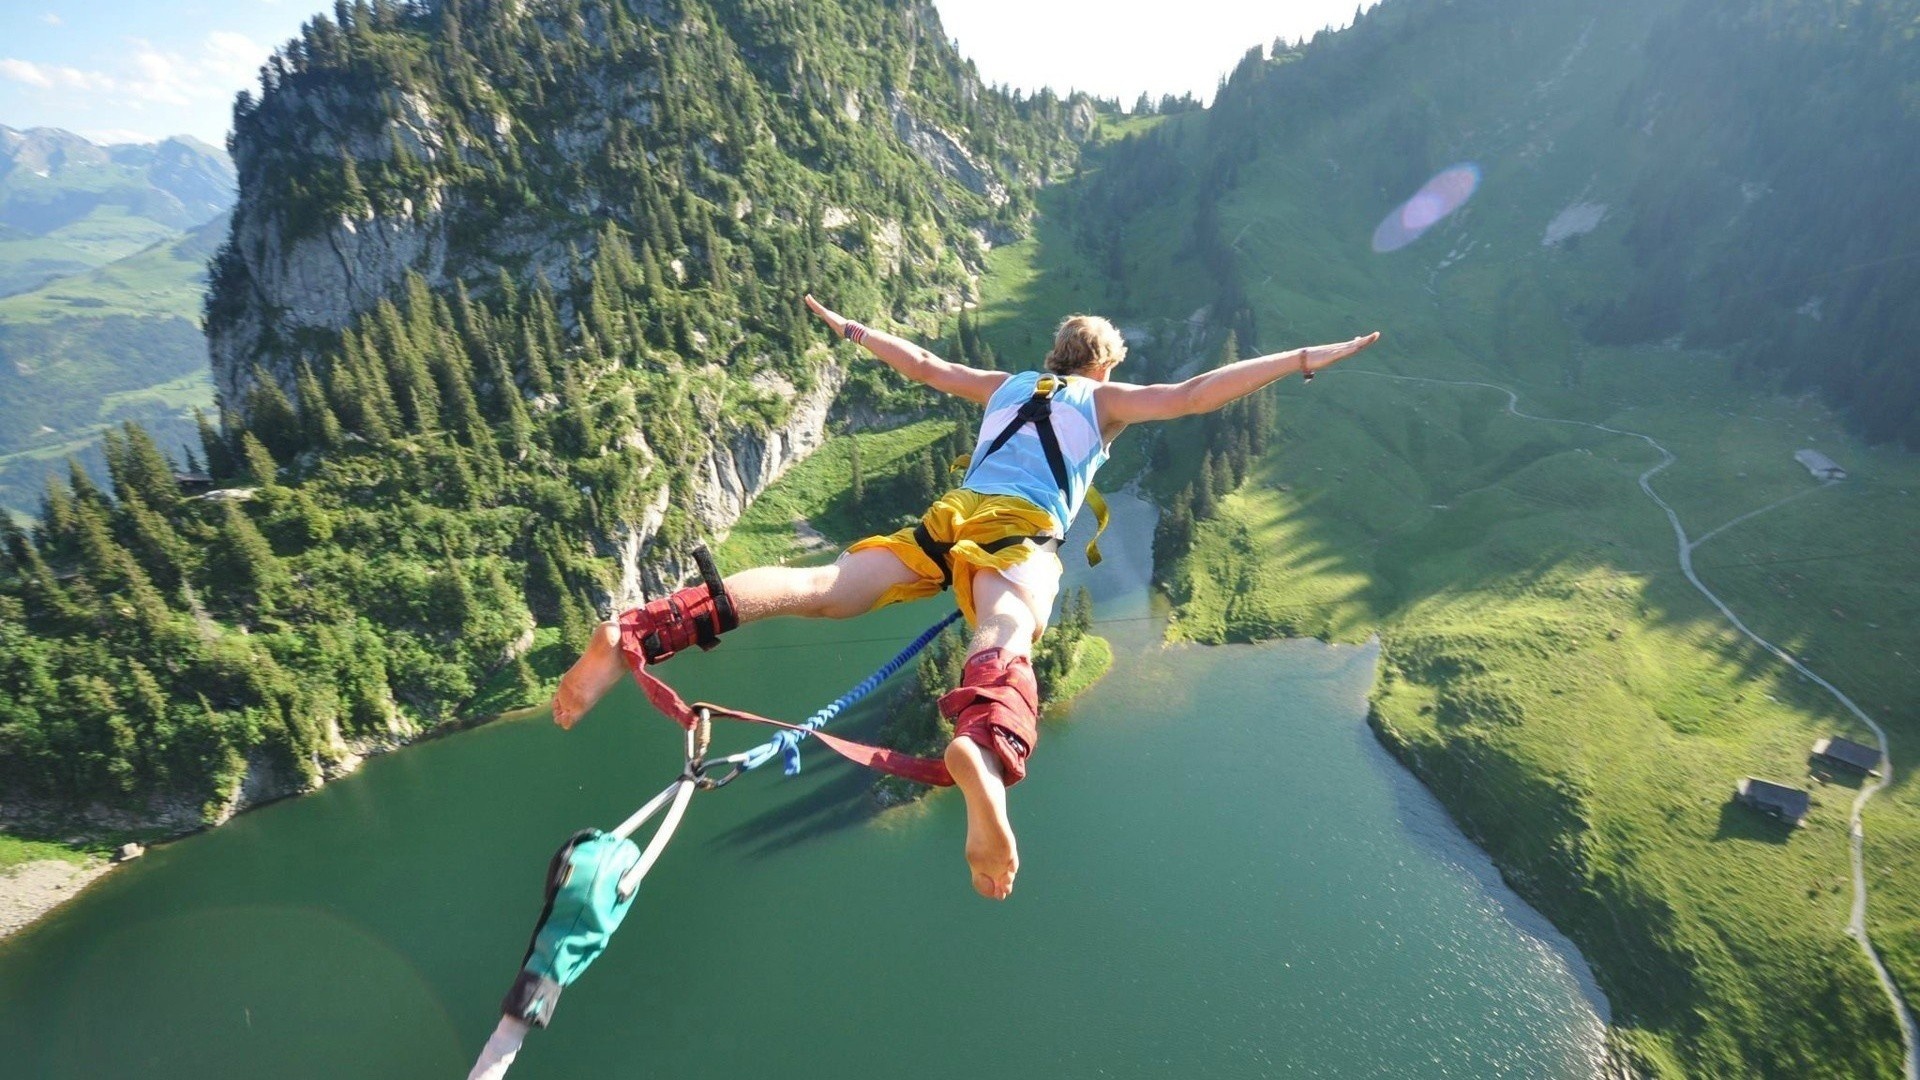 Air Sports: Extreme sports, A man goes bungee jumping, A free-fall, Switzerland. 1920x1080 Full HD Background.